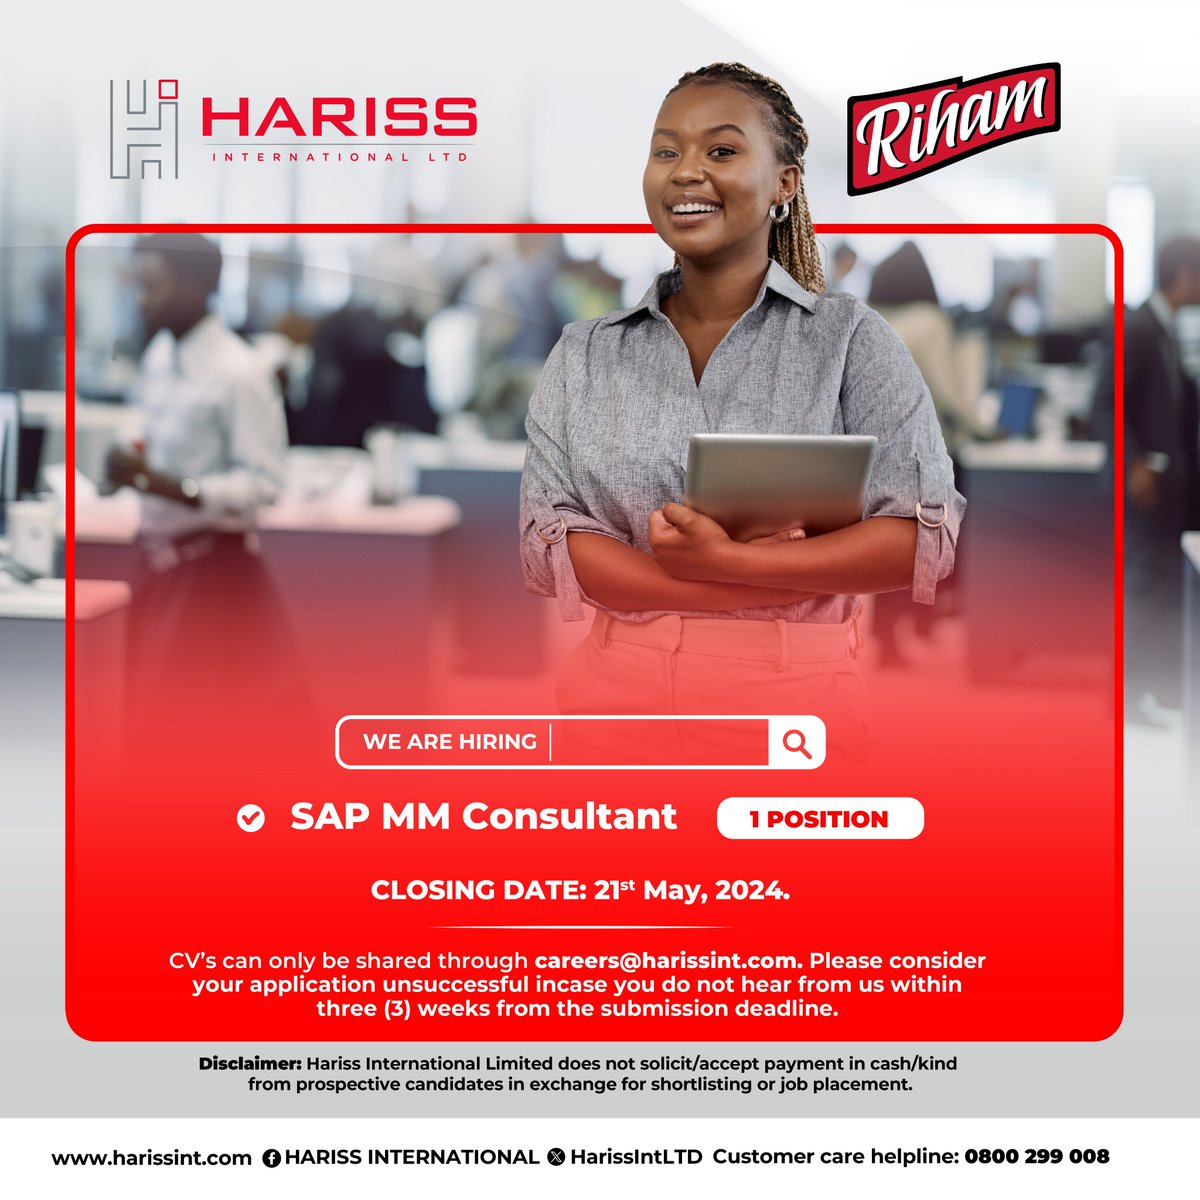 We are looking for a SAP MM Consultant Email CV: careers@harissint.com Job Details: For a detailed look at what the role entails, click the link to view the full Job Description. bit.ly/HIL-SAP Apply or refer someone. Good luck!